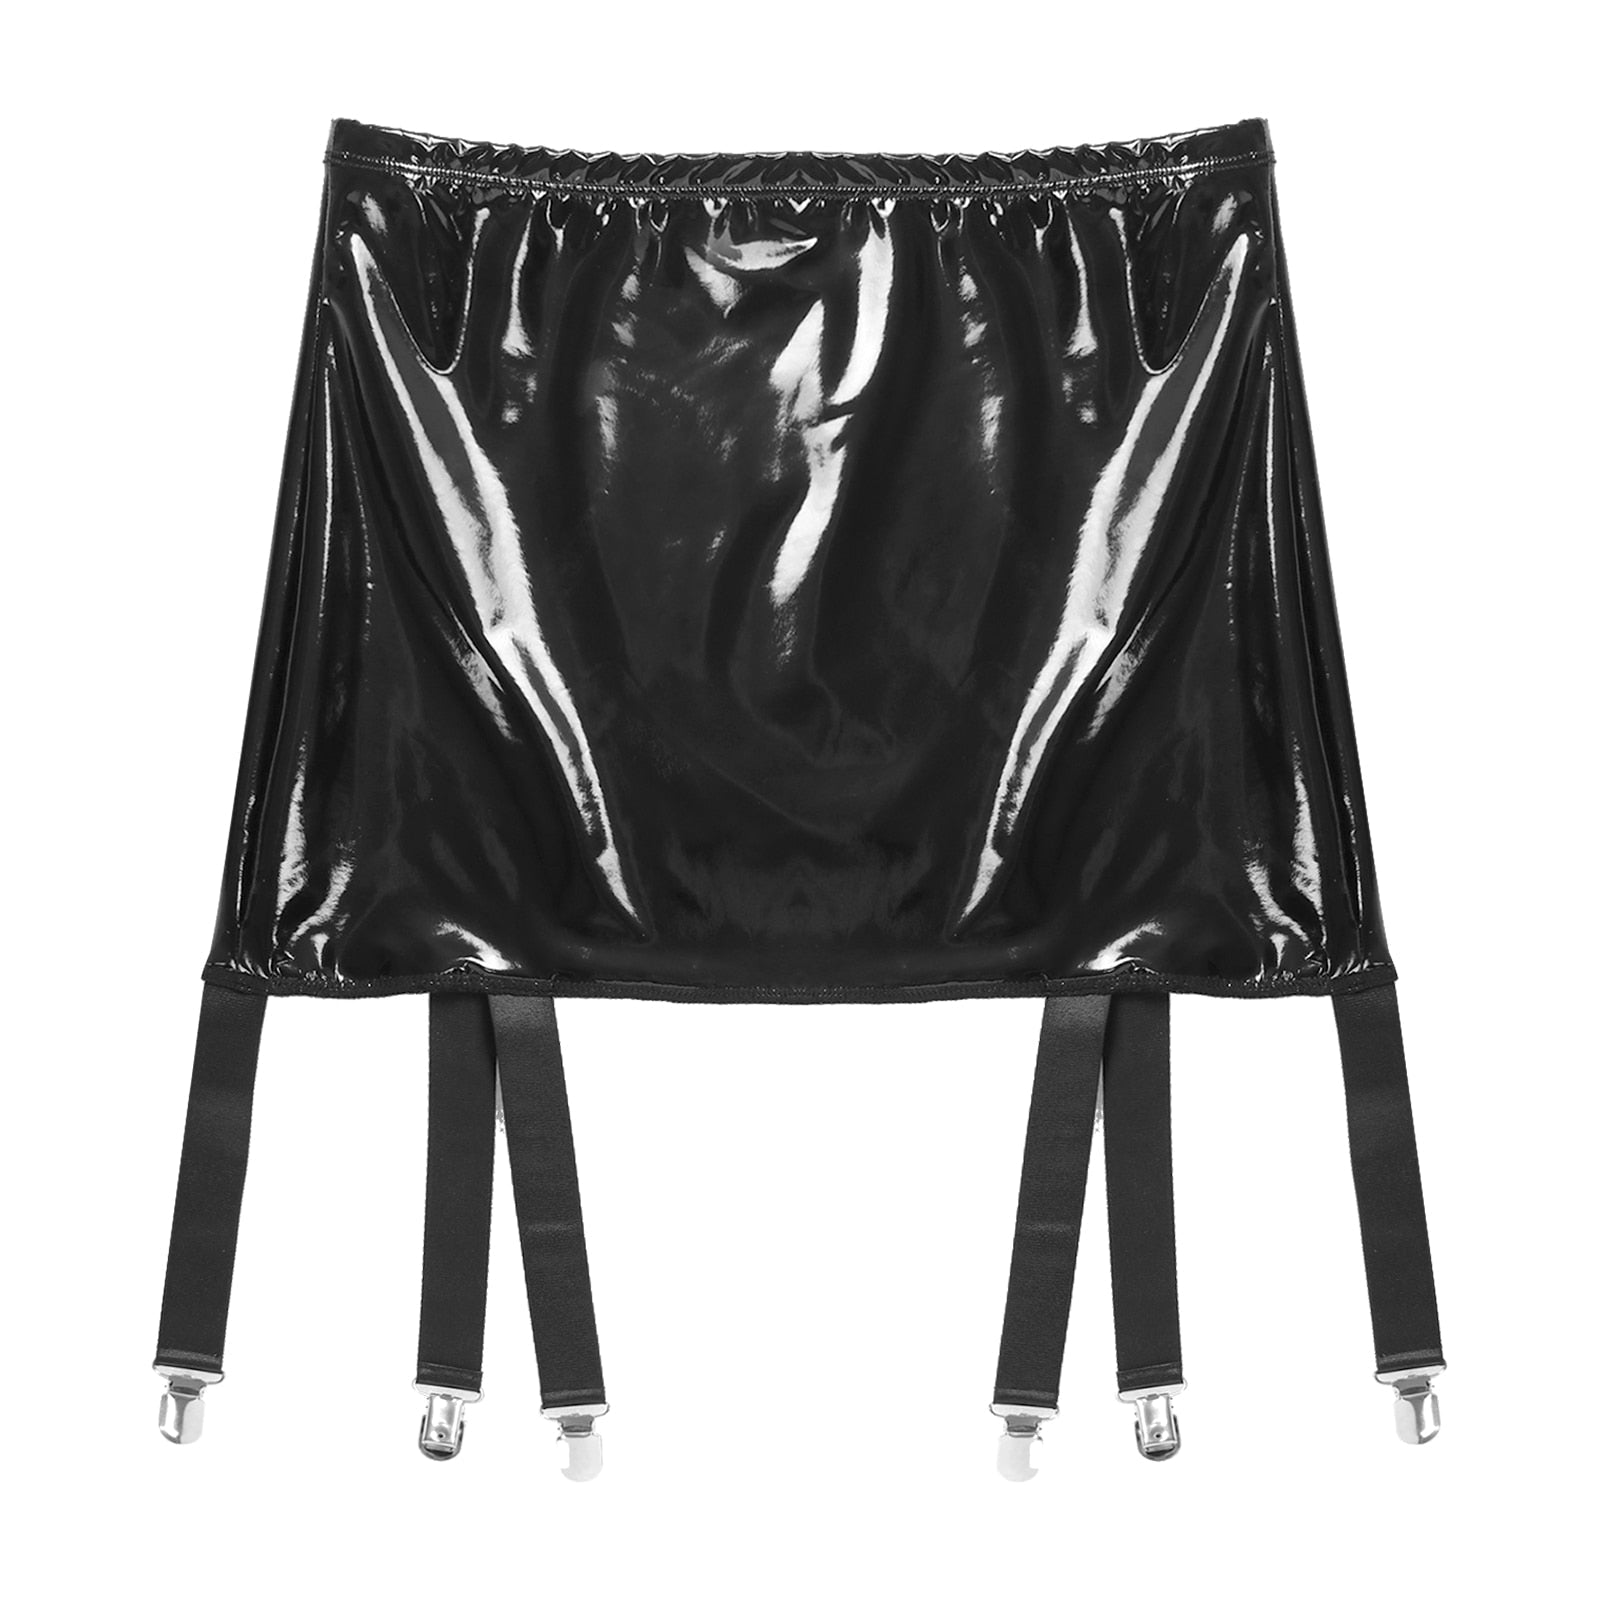 Patent Leather Skirts Wet Look